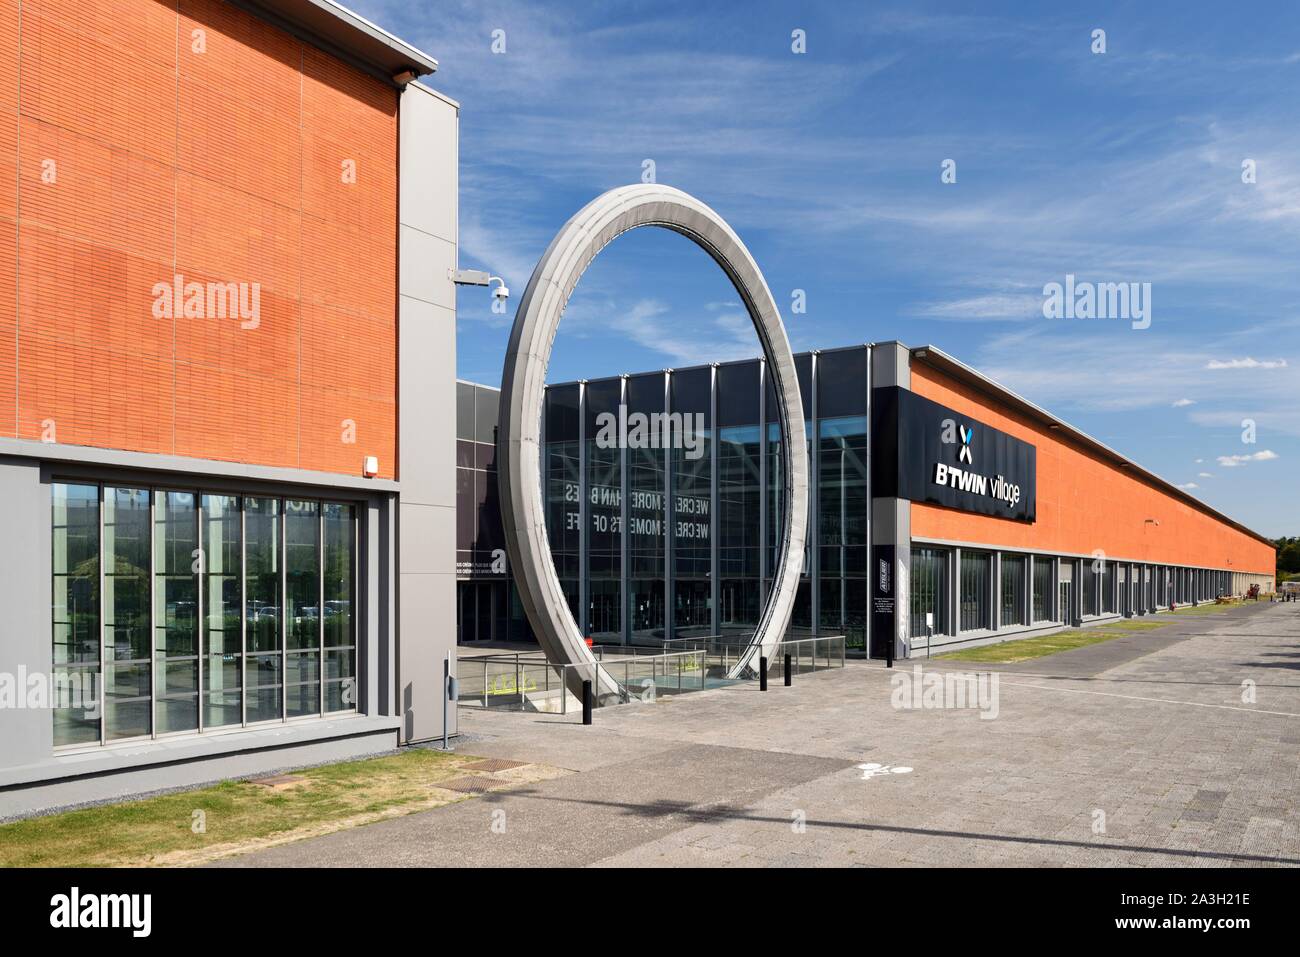 France, Nord, Lille, BTWIN Village store of the Decathlon brand, dedicated to Decathlon brand bicycles including Rockrider and others and housing the manufacturing plant, workshops, and a shop Stock Photo